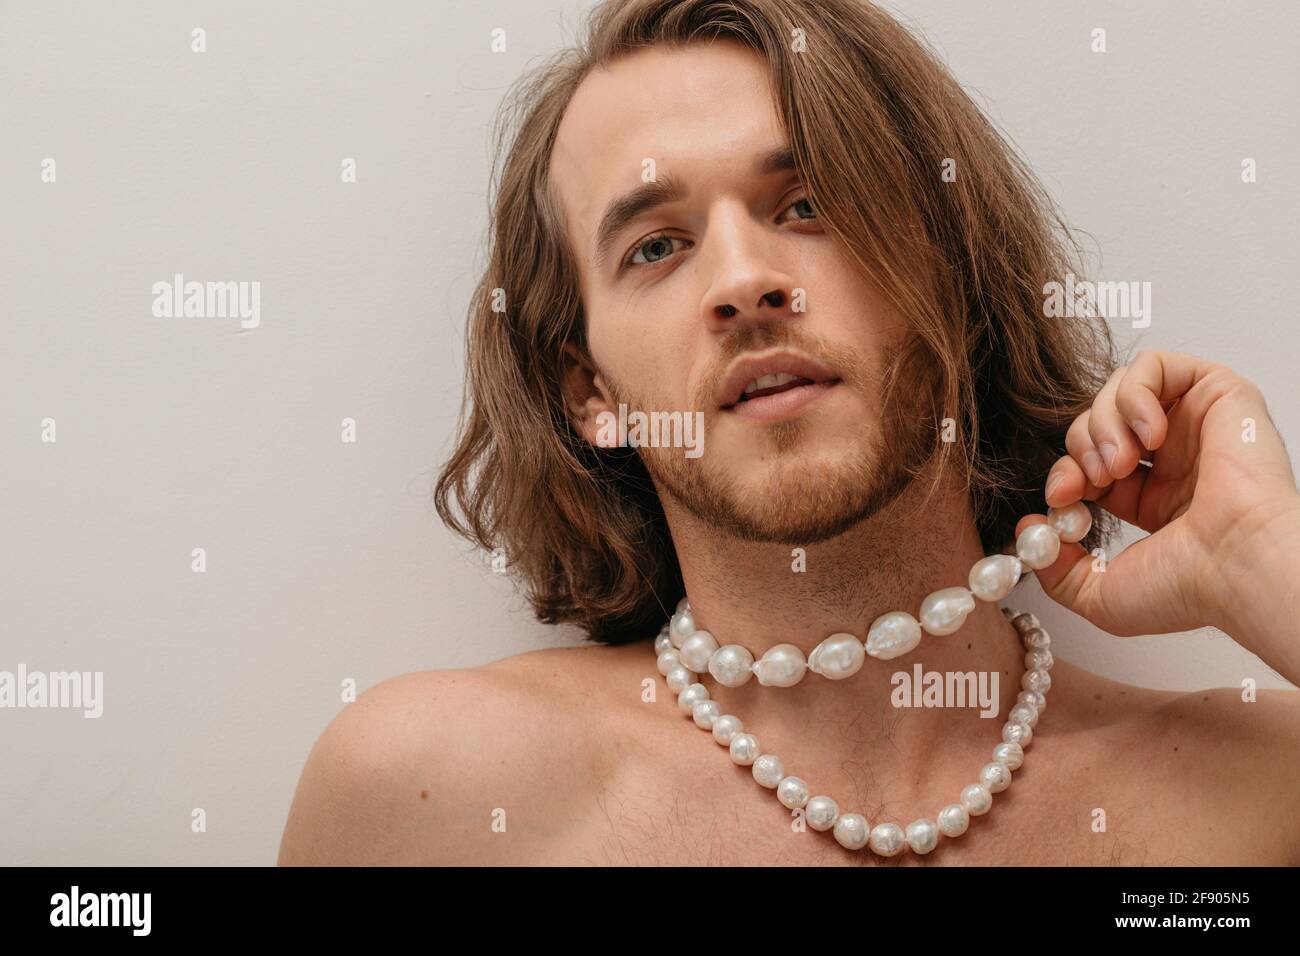 Portrait of a handsome shirtless man wearing pearl necklaces Stock Photo